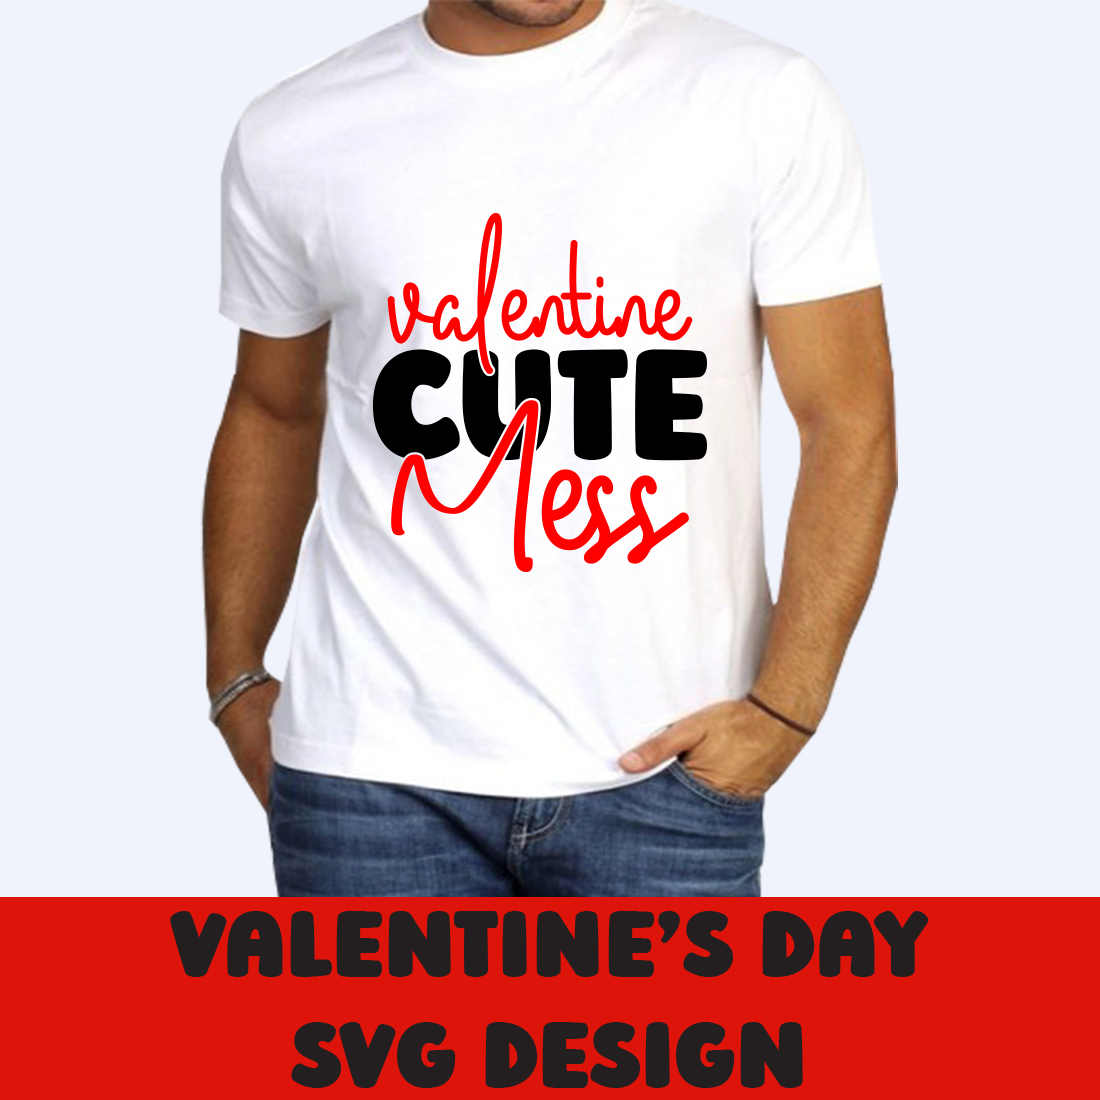 Picture of a white t-shirt with an elegant inscription Valentine Cute Mess